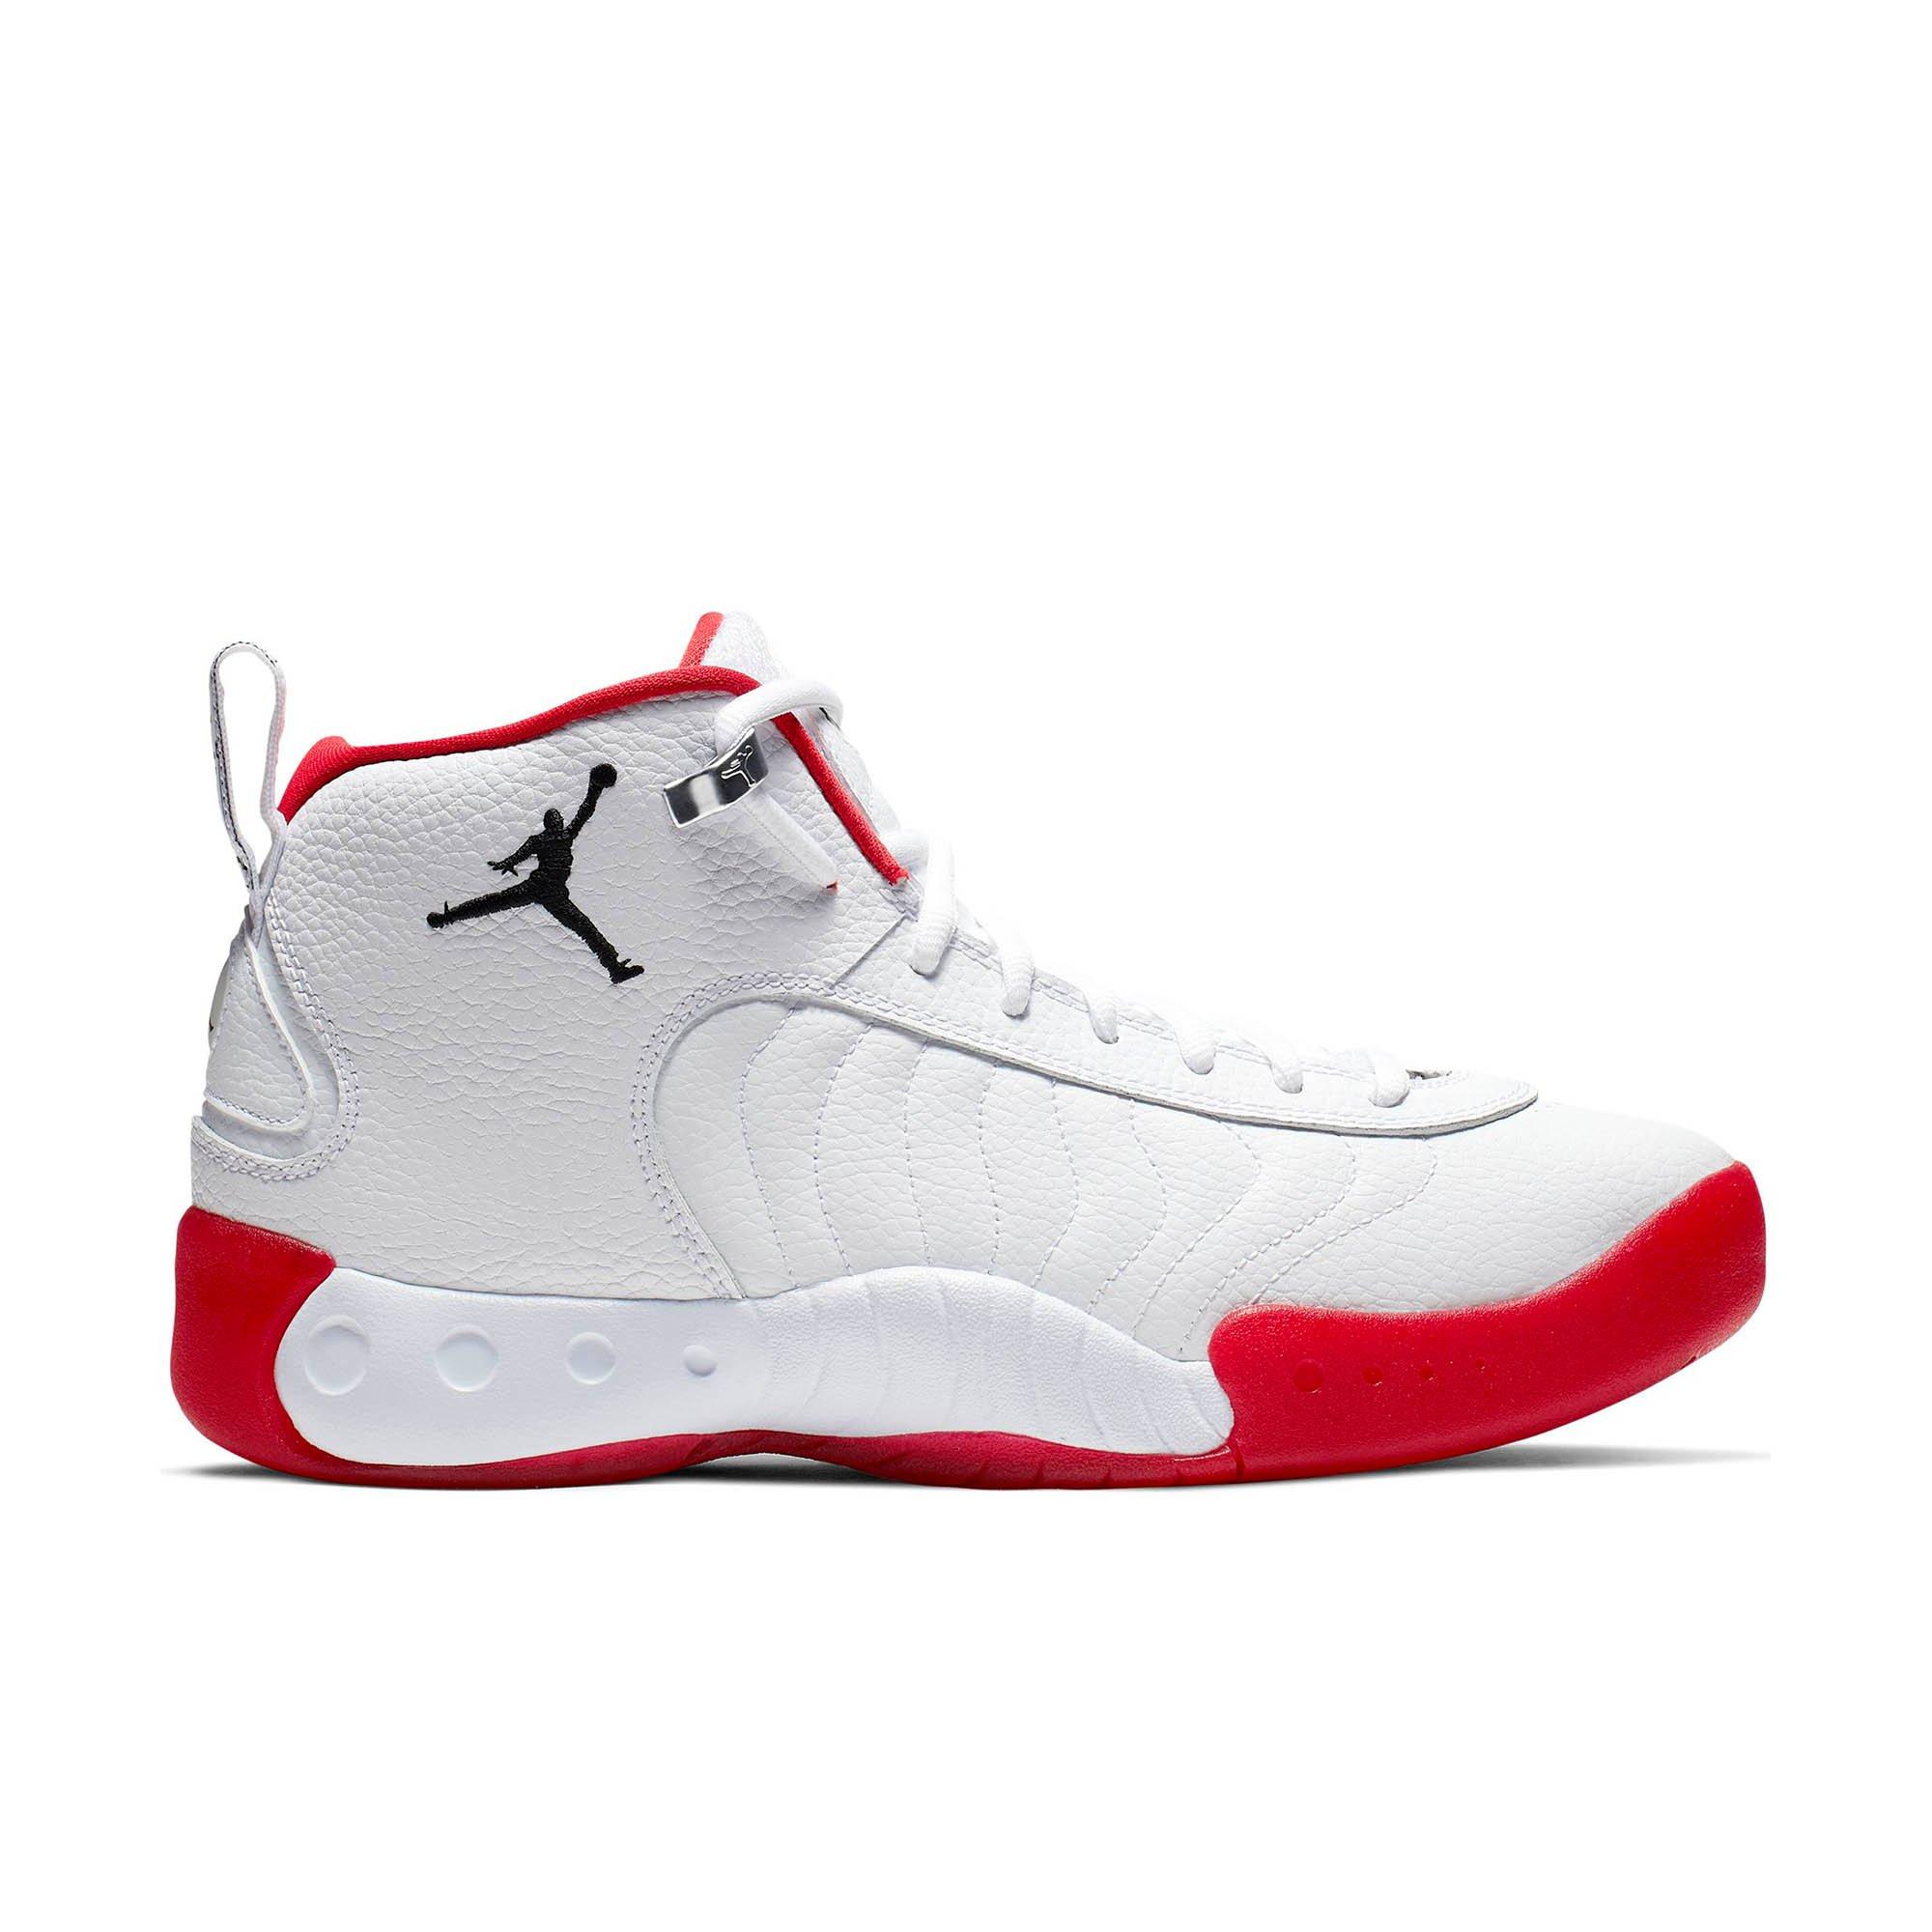 white and red jordan shoes